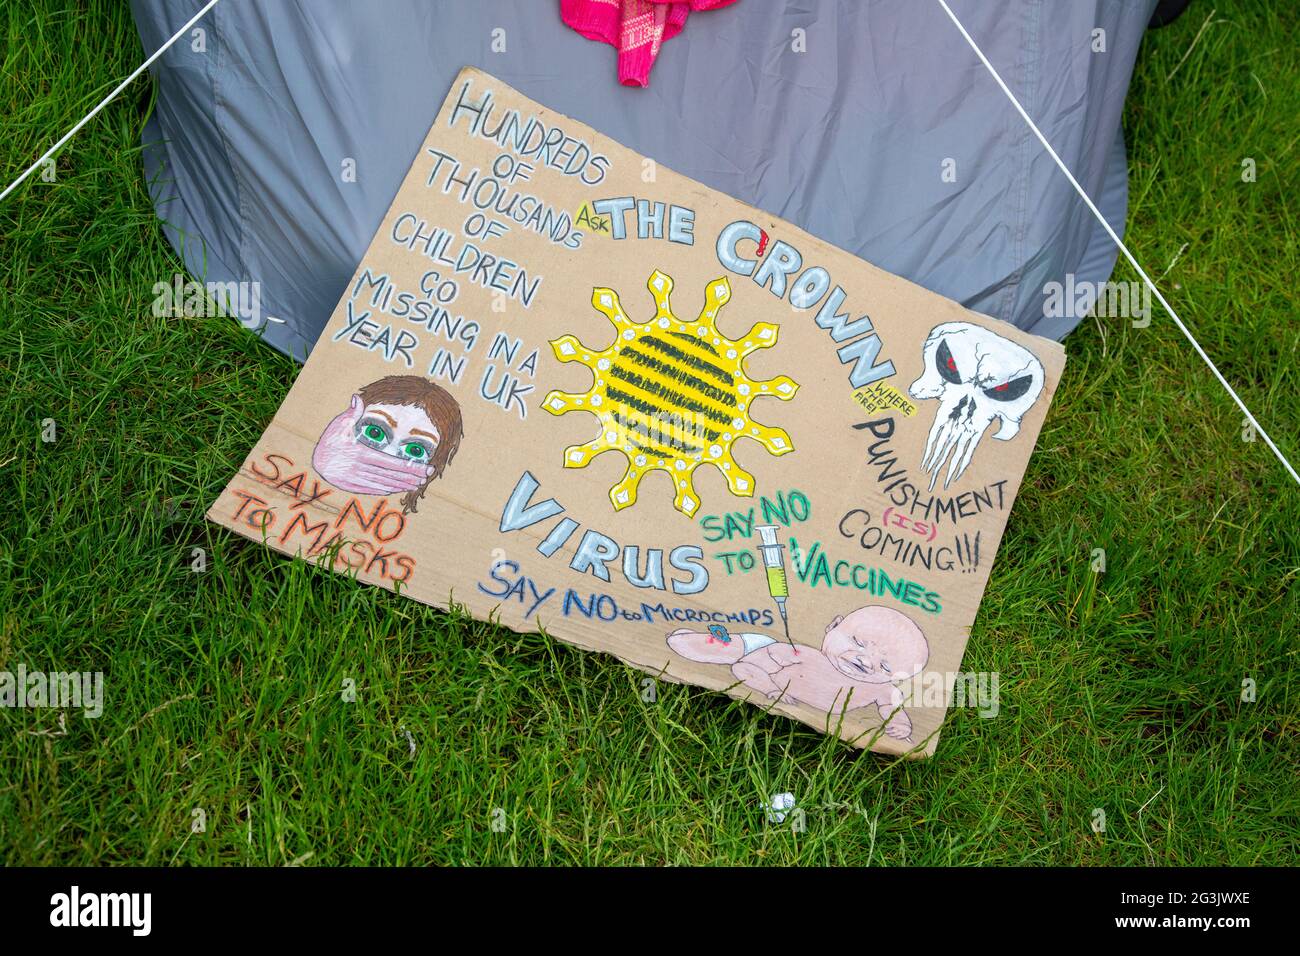 Signage at a Freedom protester camp on Shepherd's Bush Green, London, UK. June 2021 Stock Photo